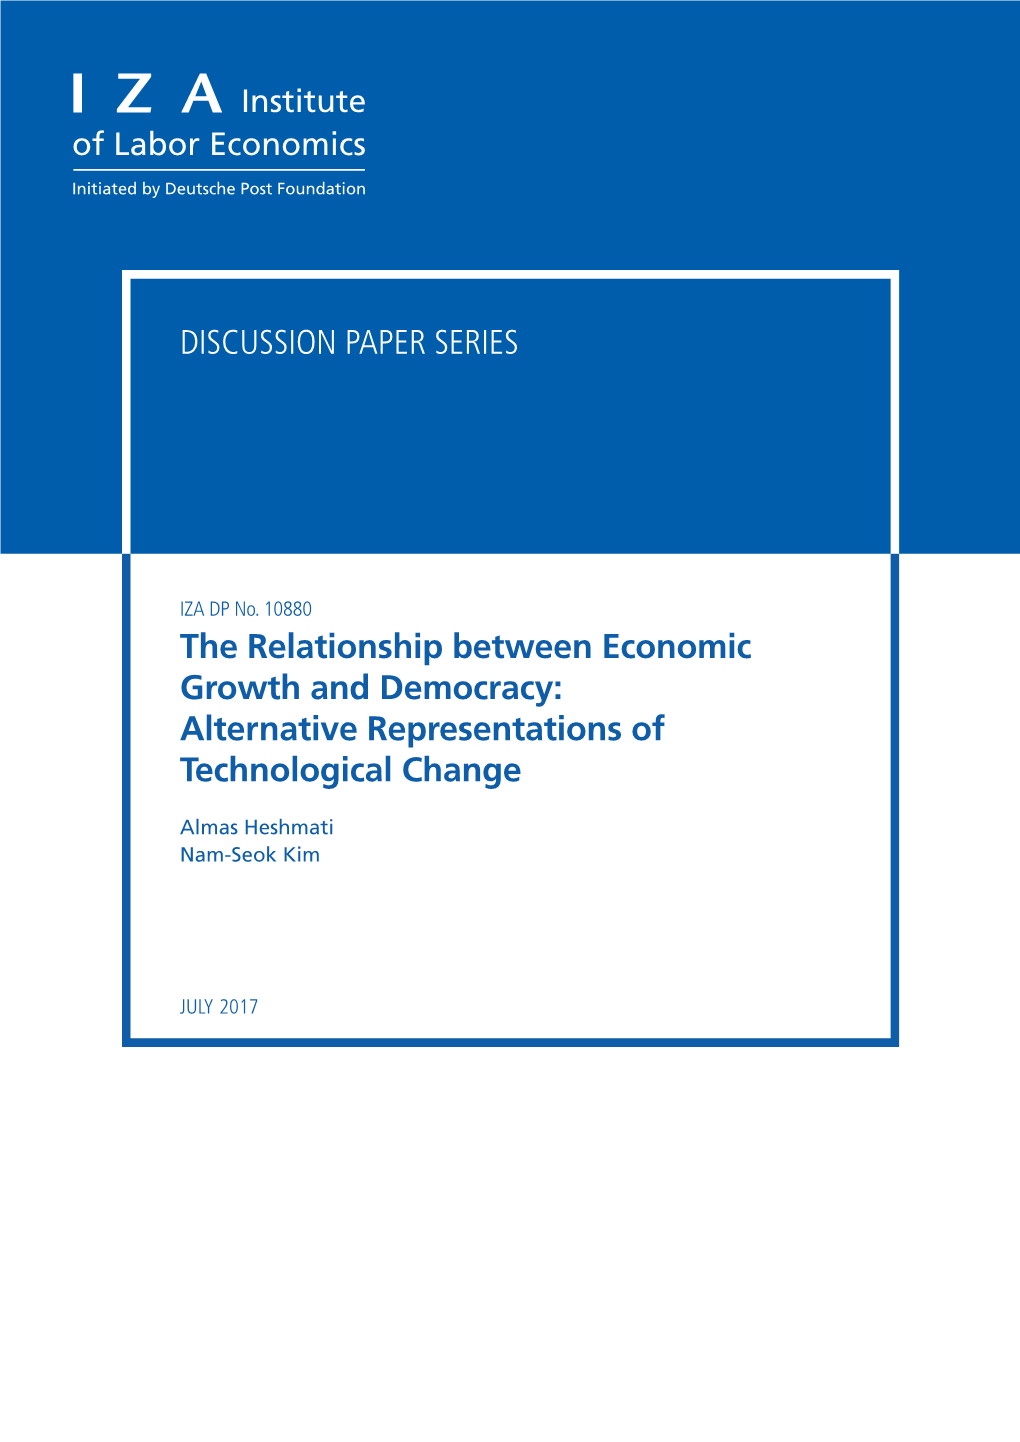 The Relationship Between Economic Growth and Democracy: Alternative Representations of Technological Change